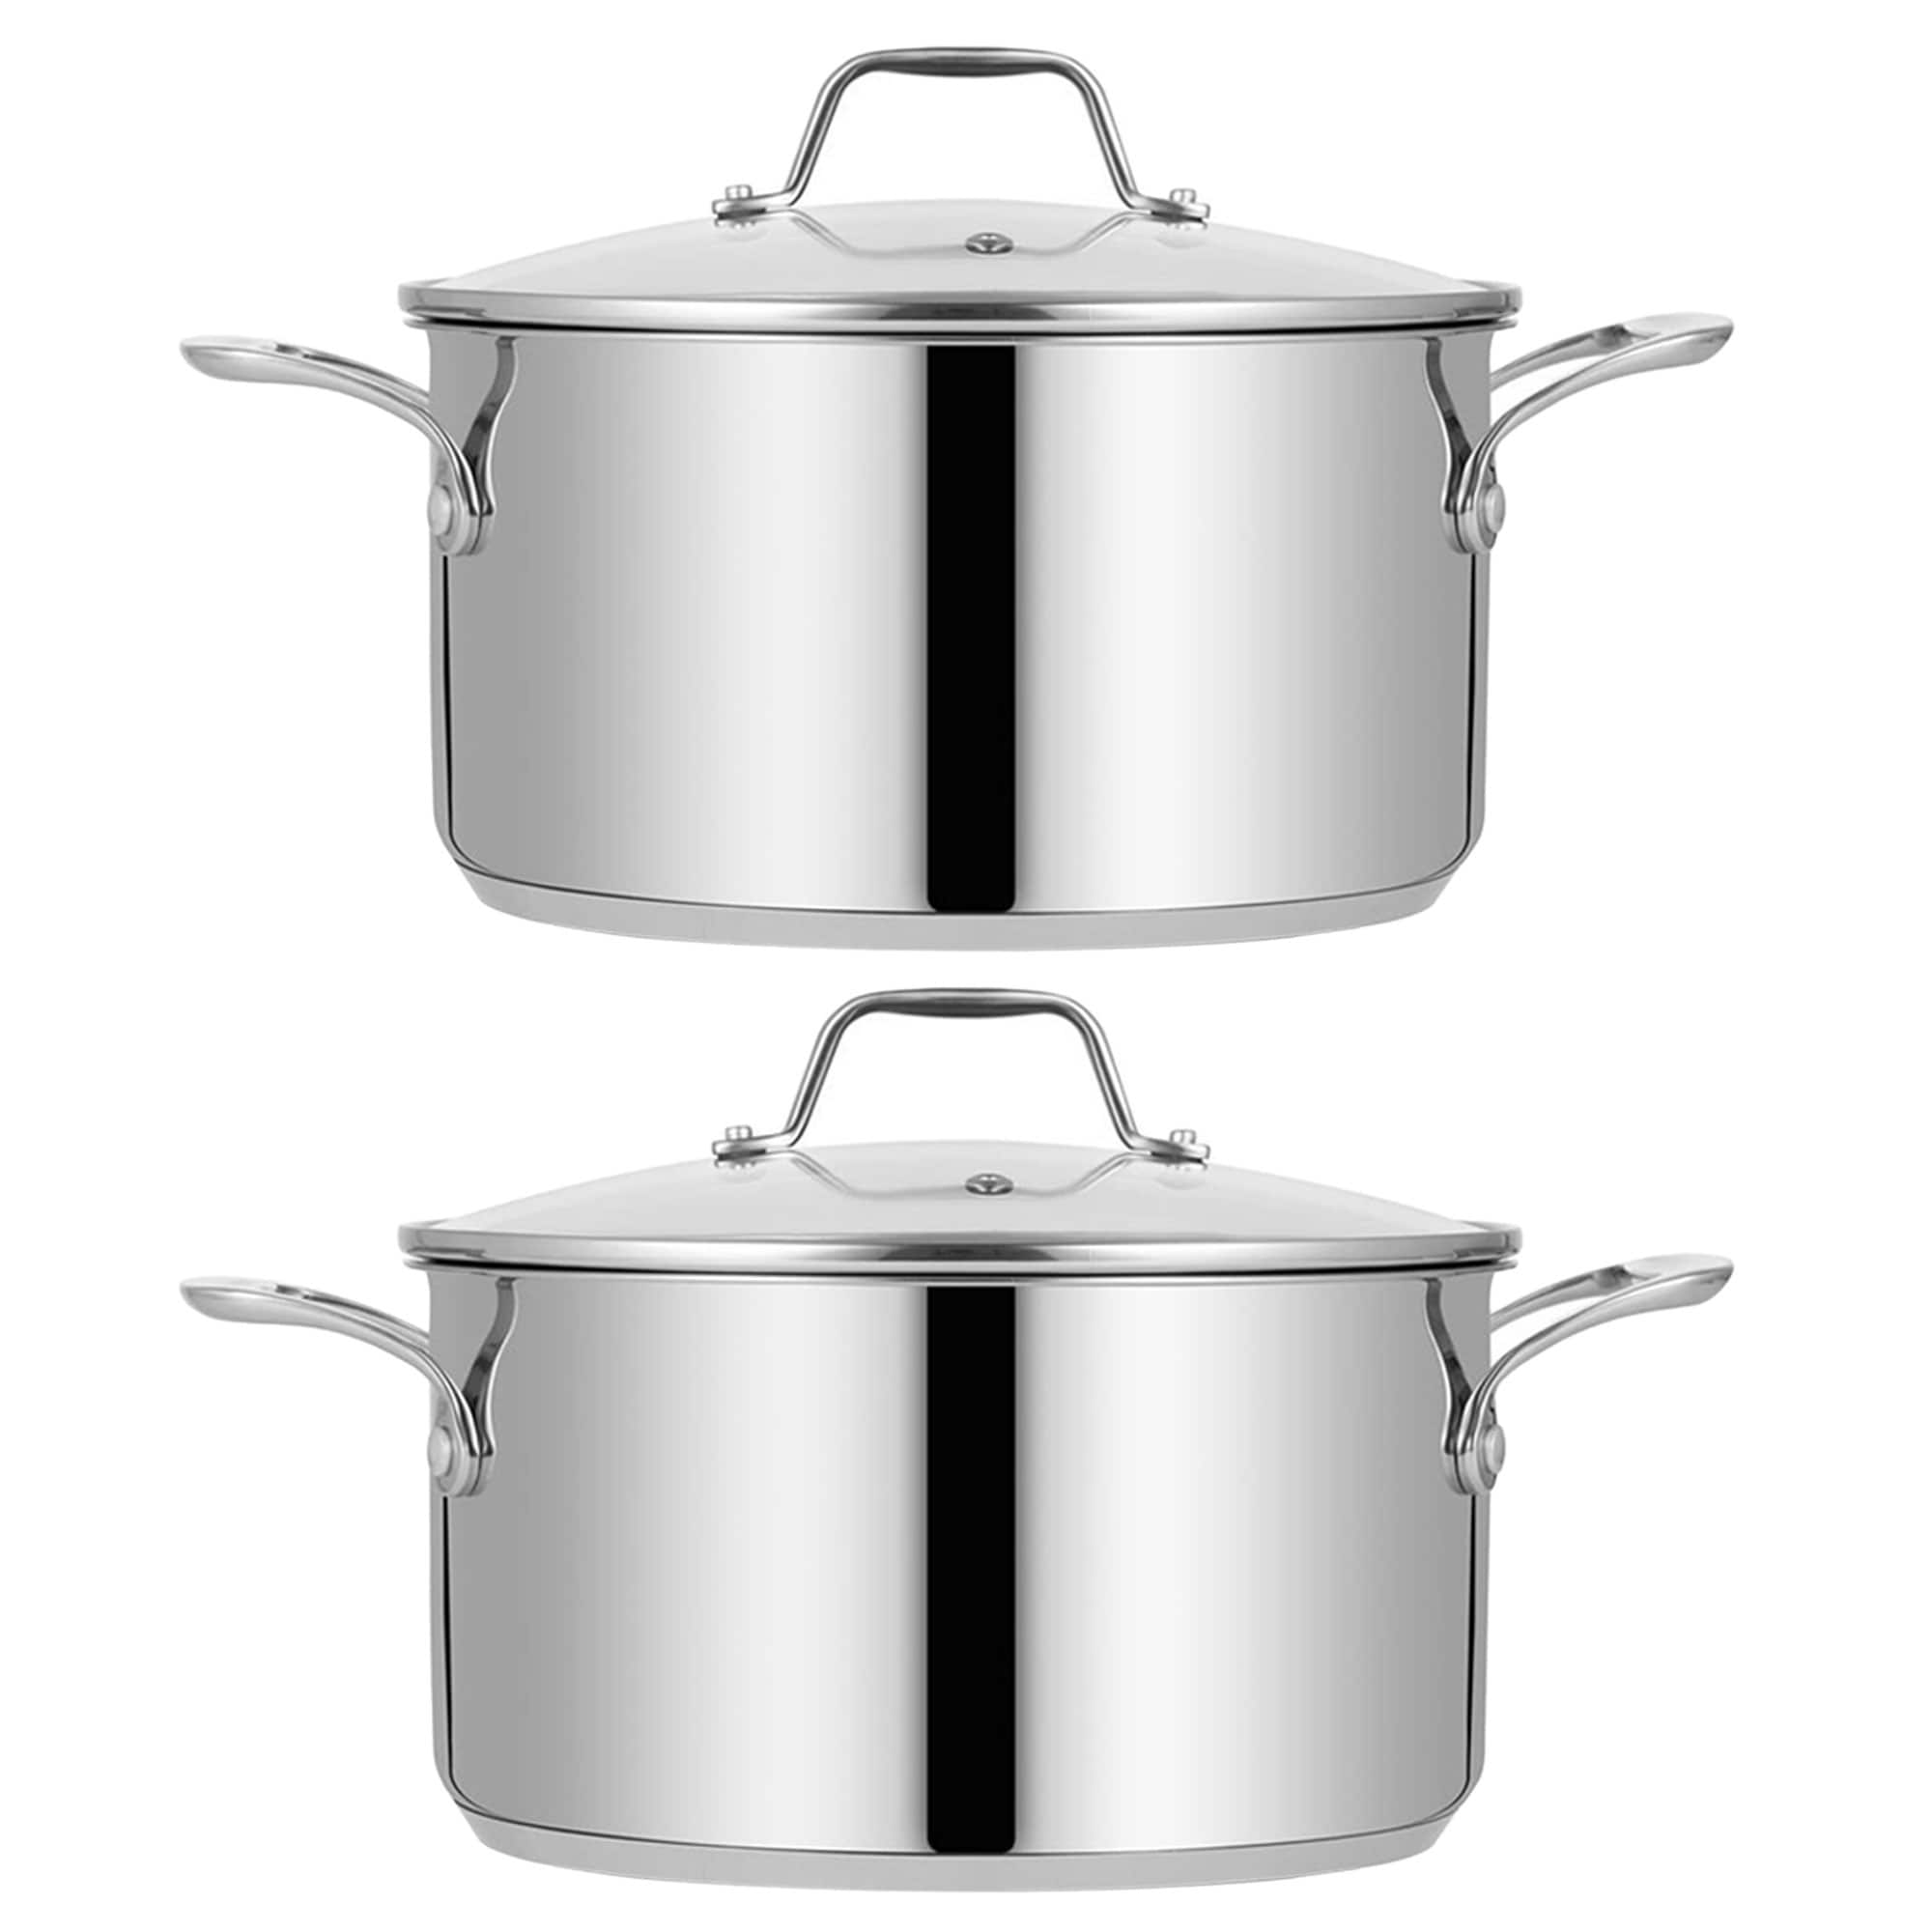 https://ak1.ostkcdn.com/images/products/is/images/direct/a4a2154509bc0e537fb7e411a70ce2ba1e0ac145/NutriChef-Heavy-Duty-8-Quart-Stainless-Steel-Soup-Stock-Pot-with-Lid-%282-Pack%29.jpg